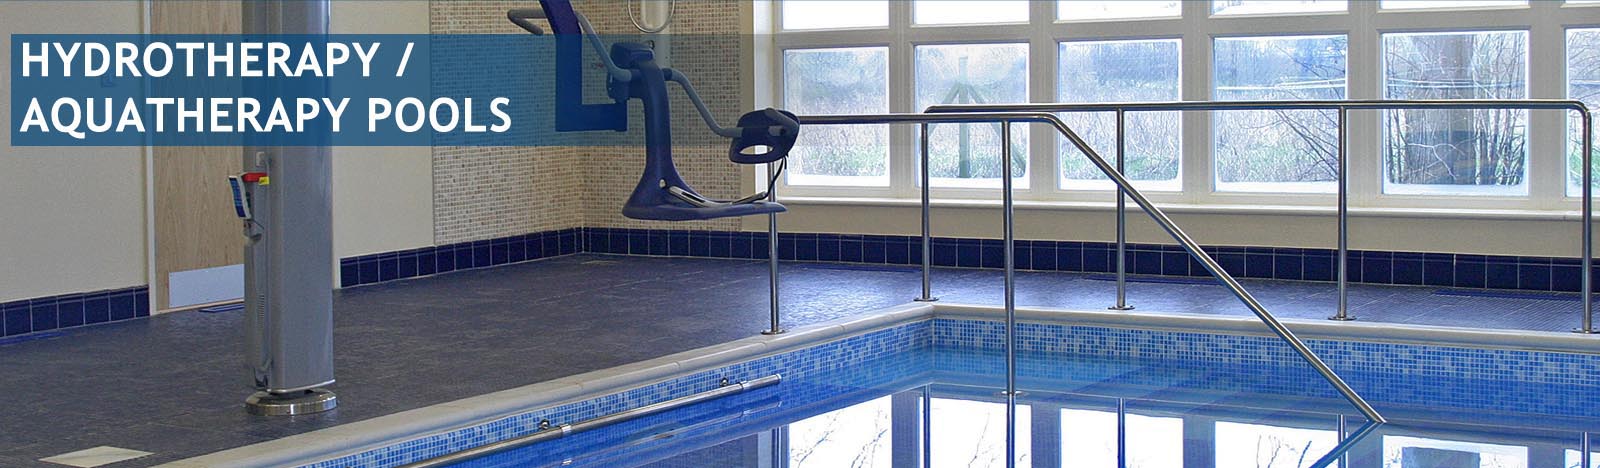 hydrotherapy pools installers manchester